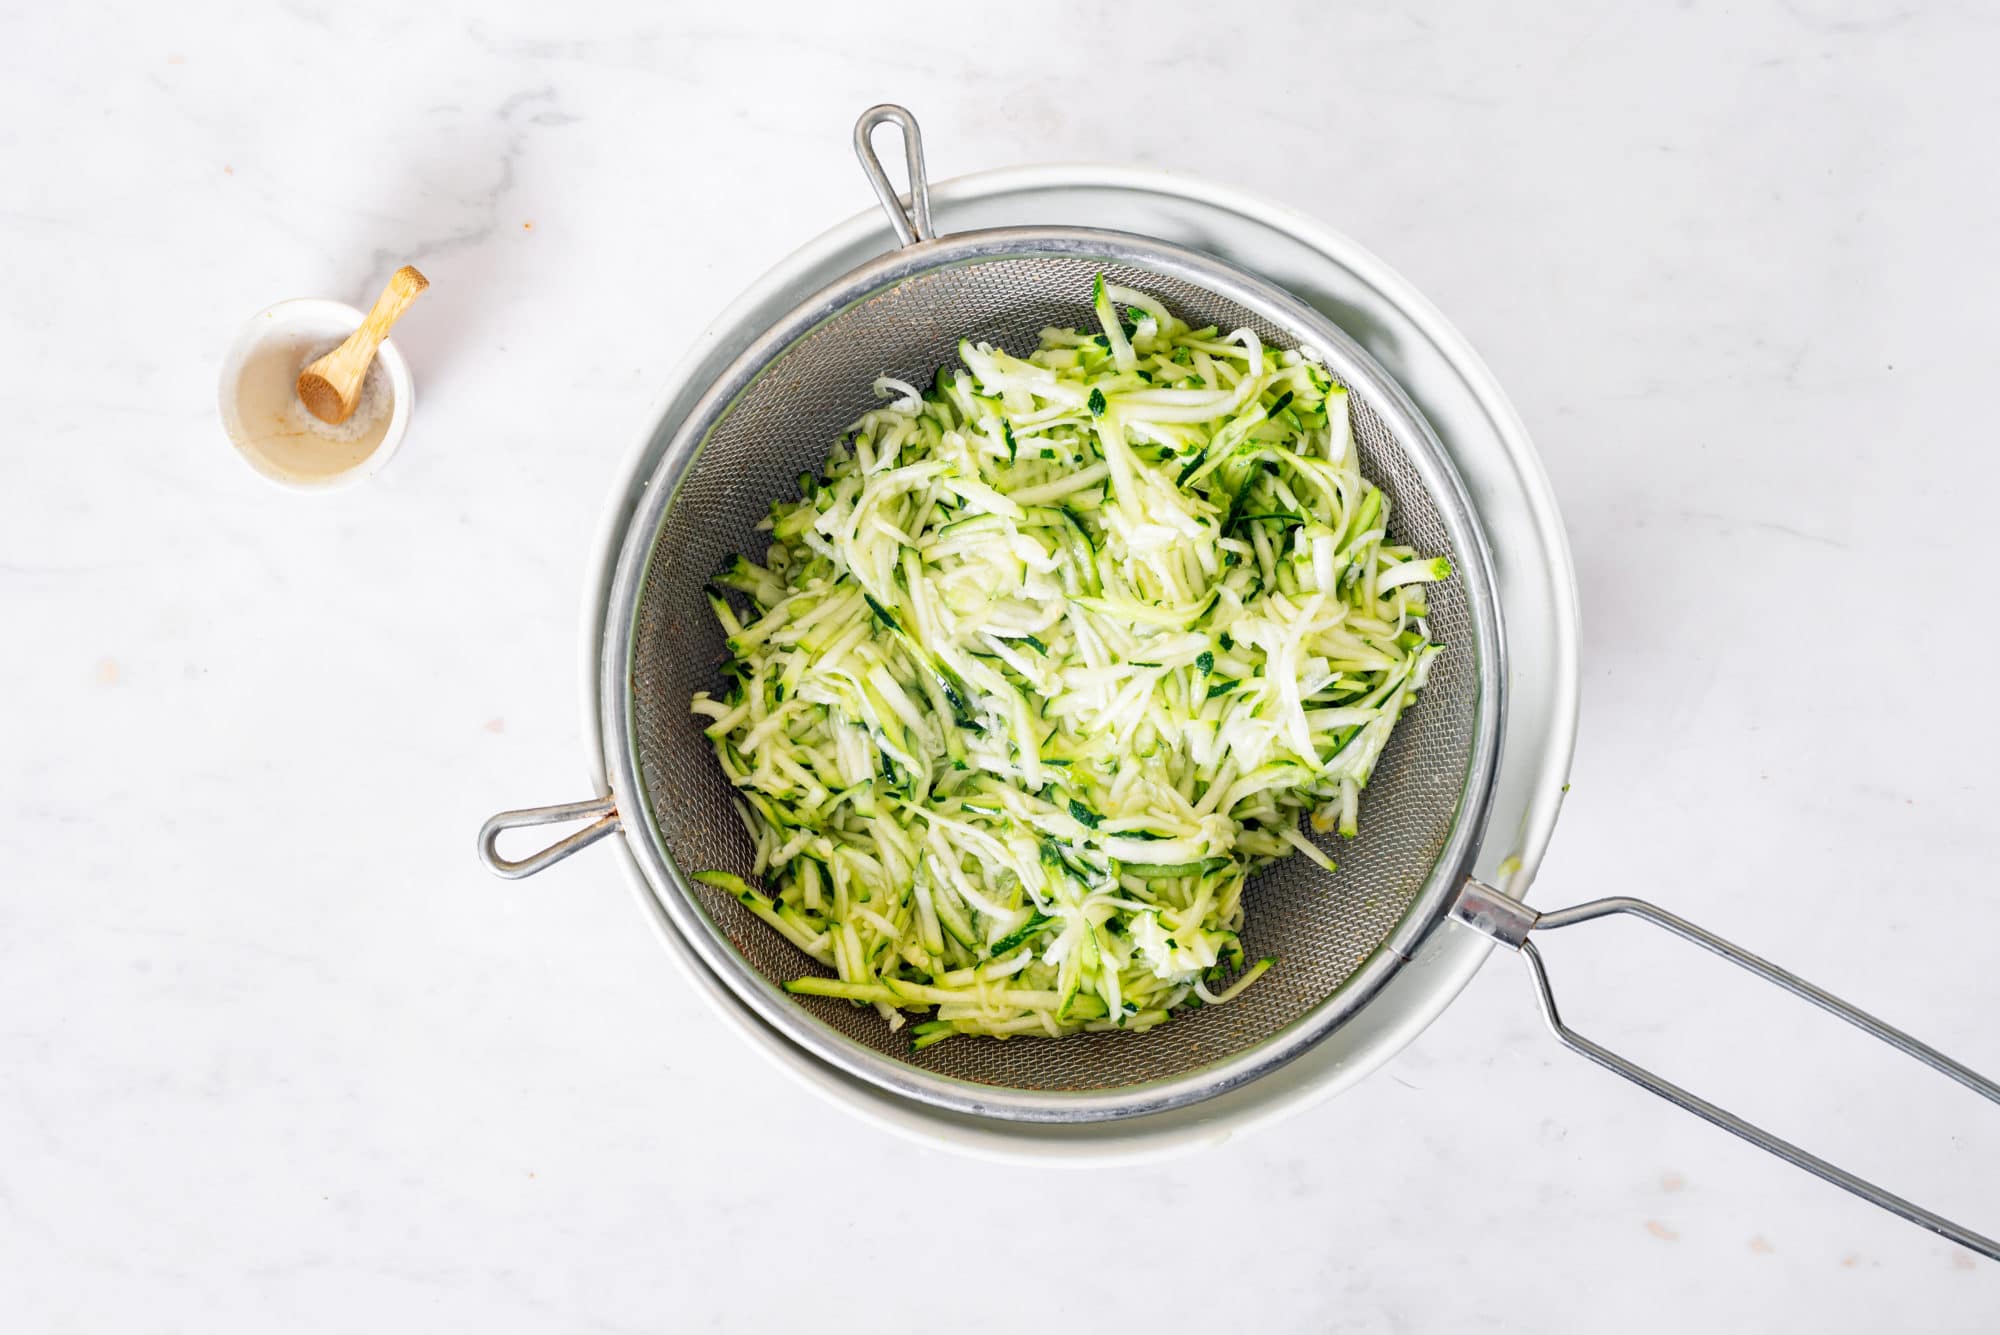 zucchini-shredded-in-a-sieve-over-a-white-bowl-with-salt-on-the-side